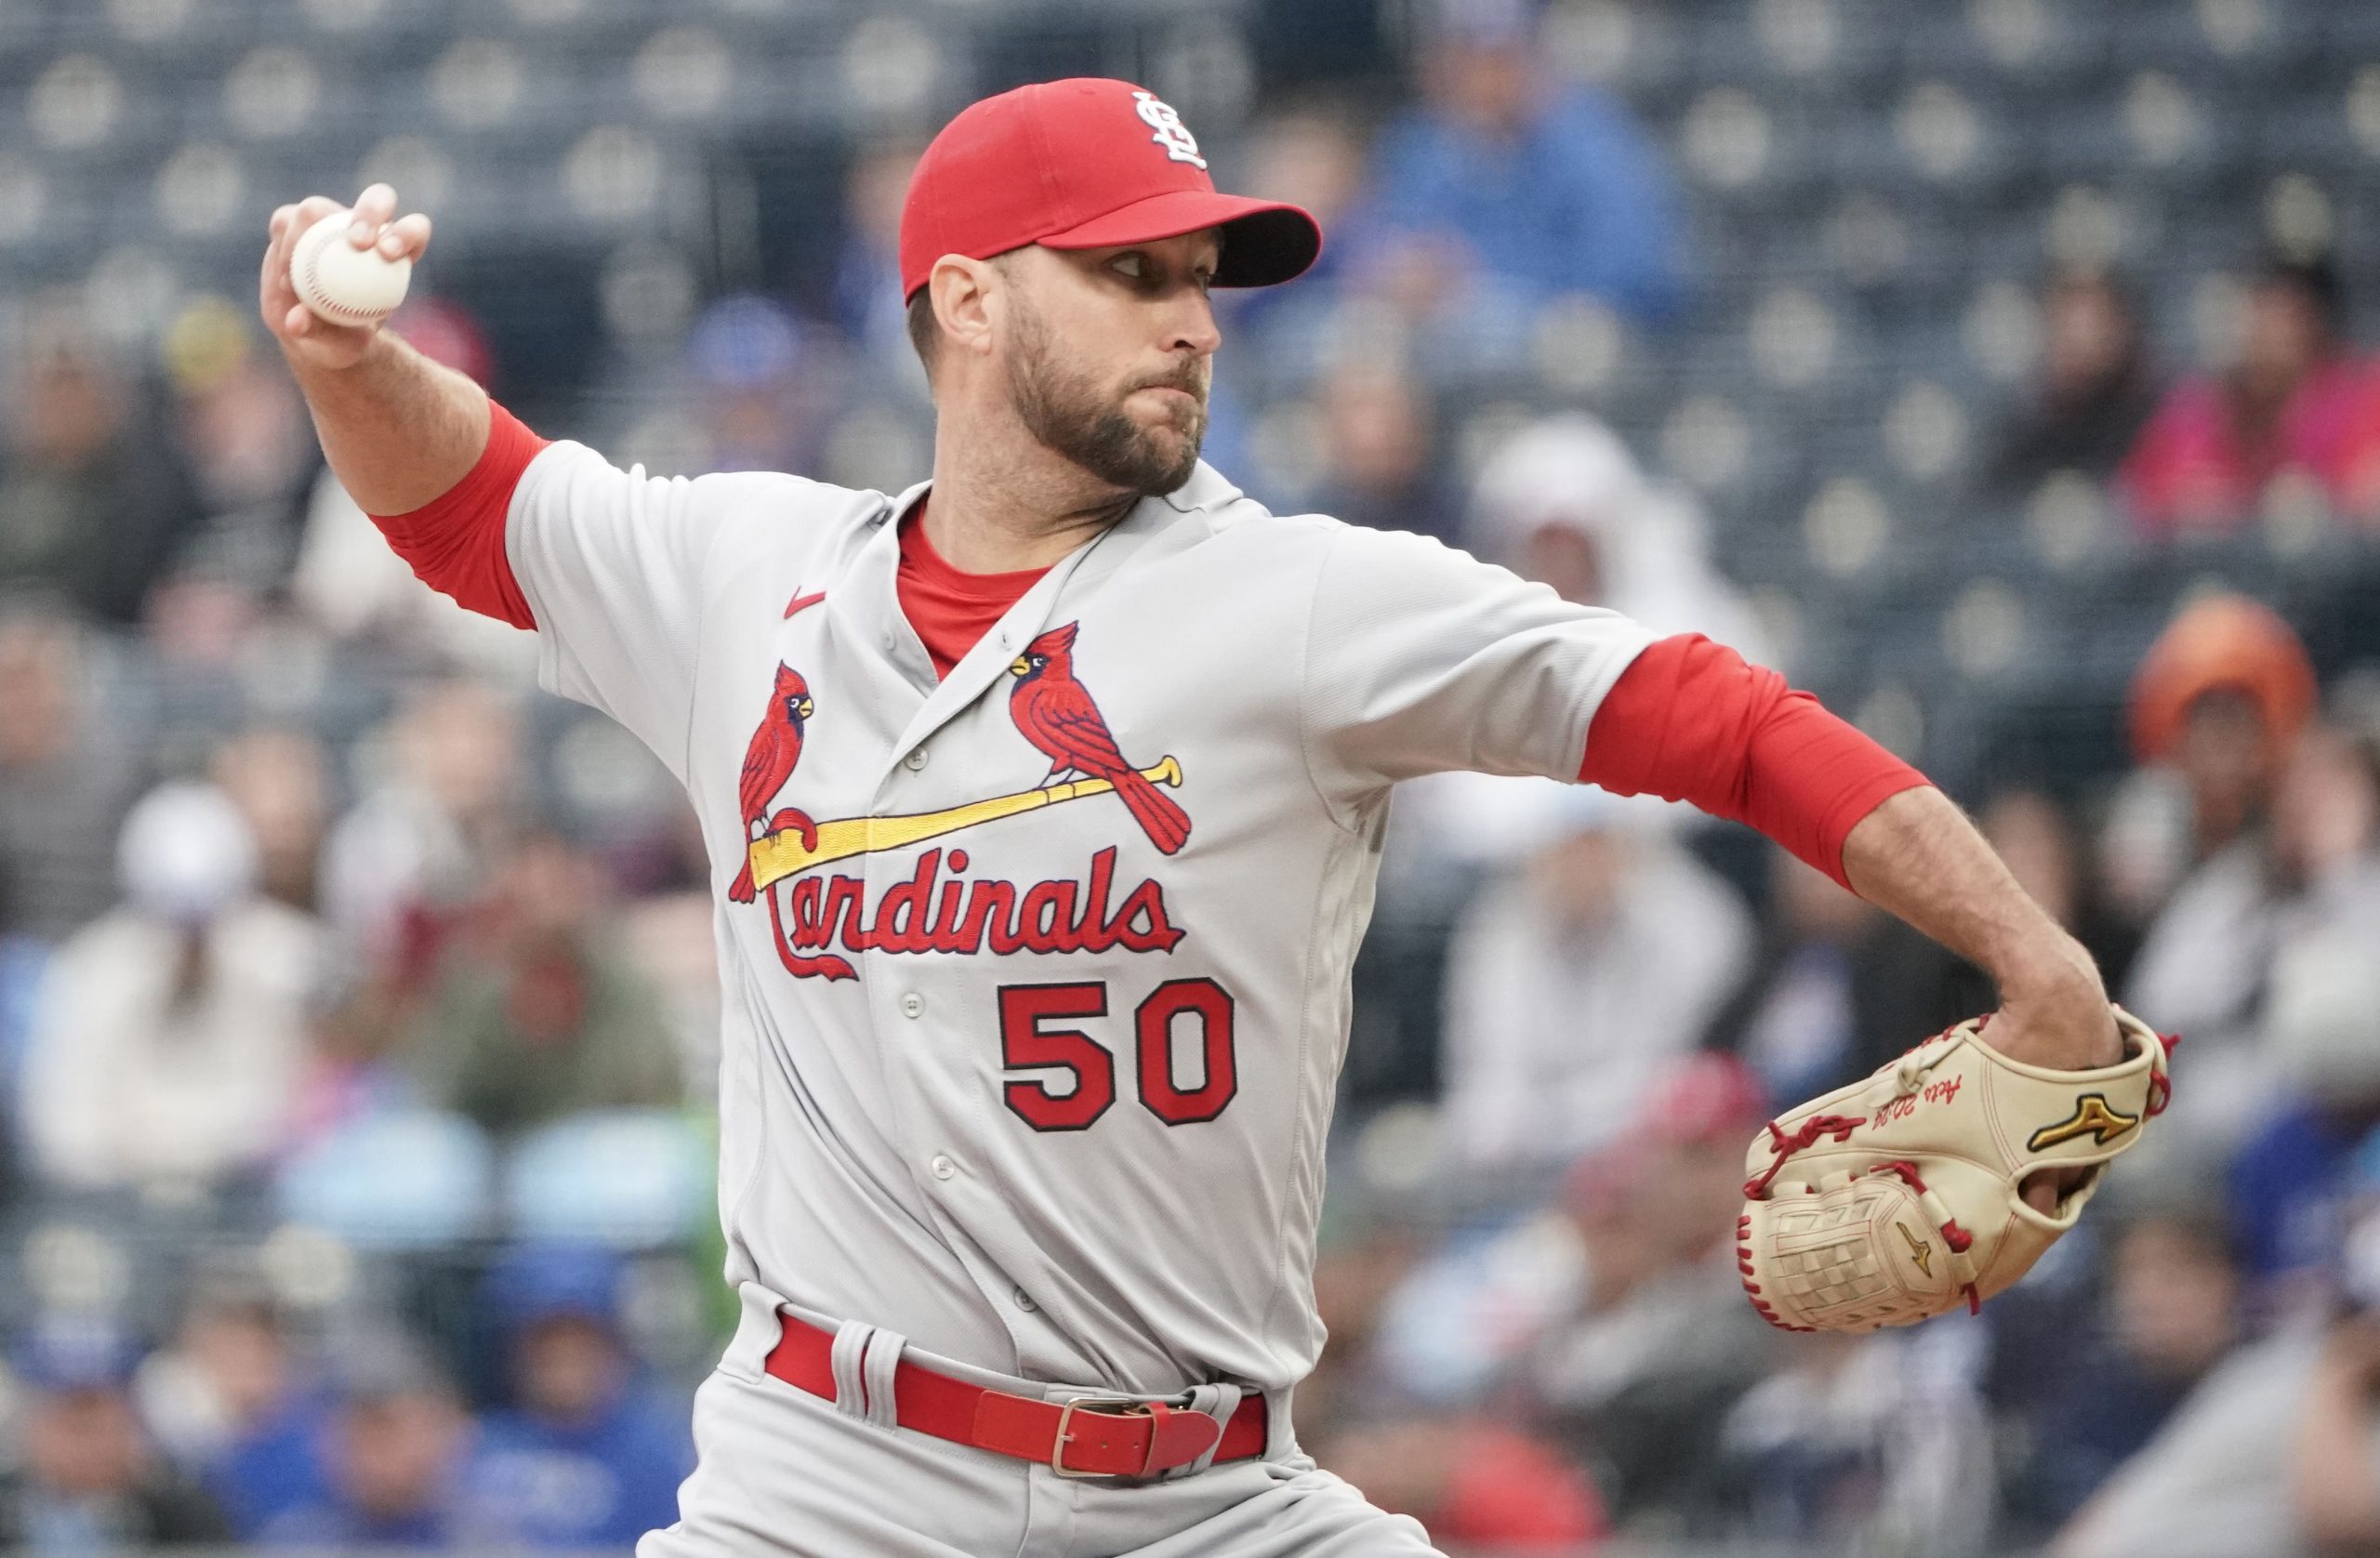 St. Louis Cardinals starting pitcher Adam Wainwright (50) delivers a pitch against the Kansas City Royals in the first inning at Kauffman Stadium.